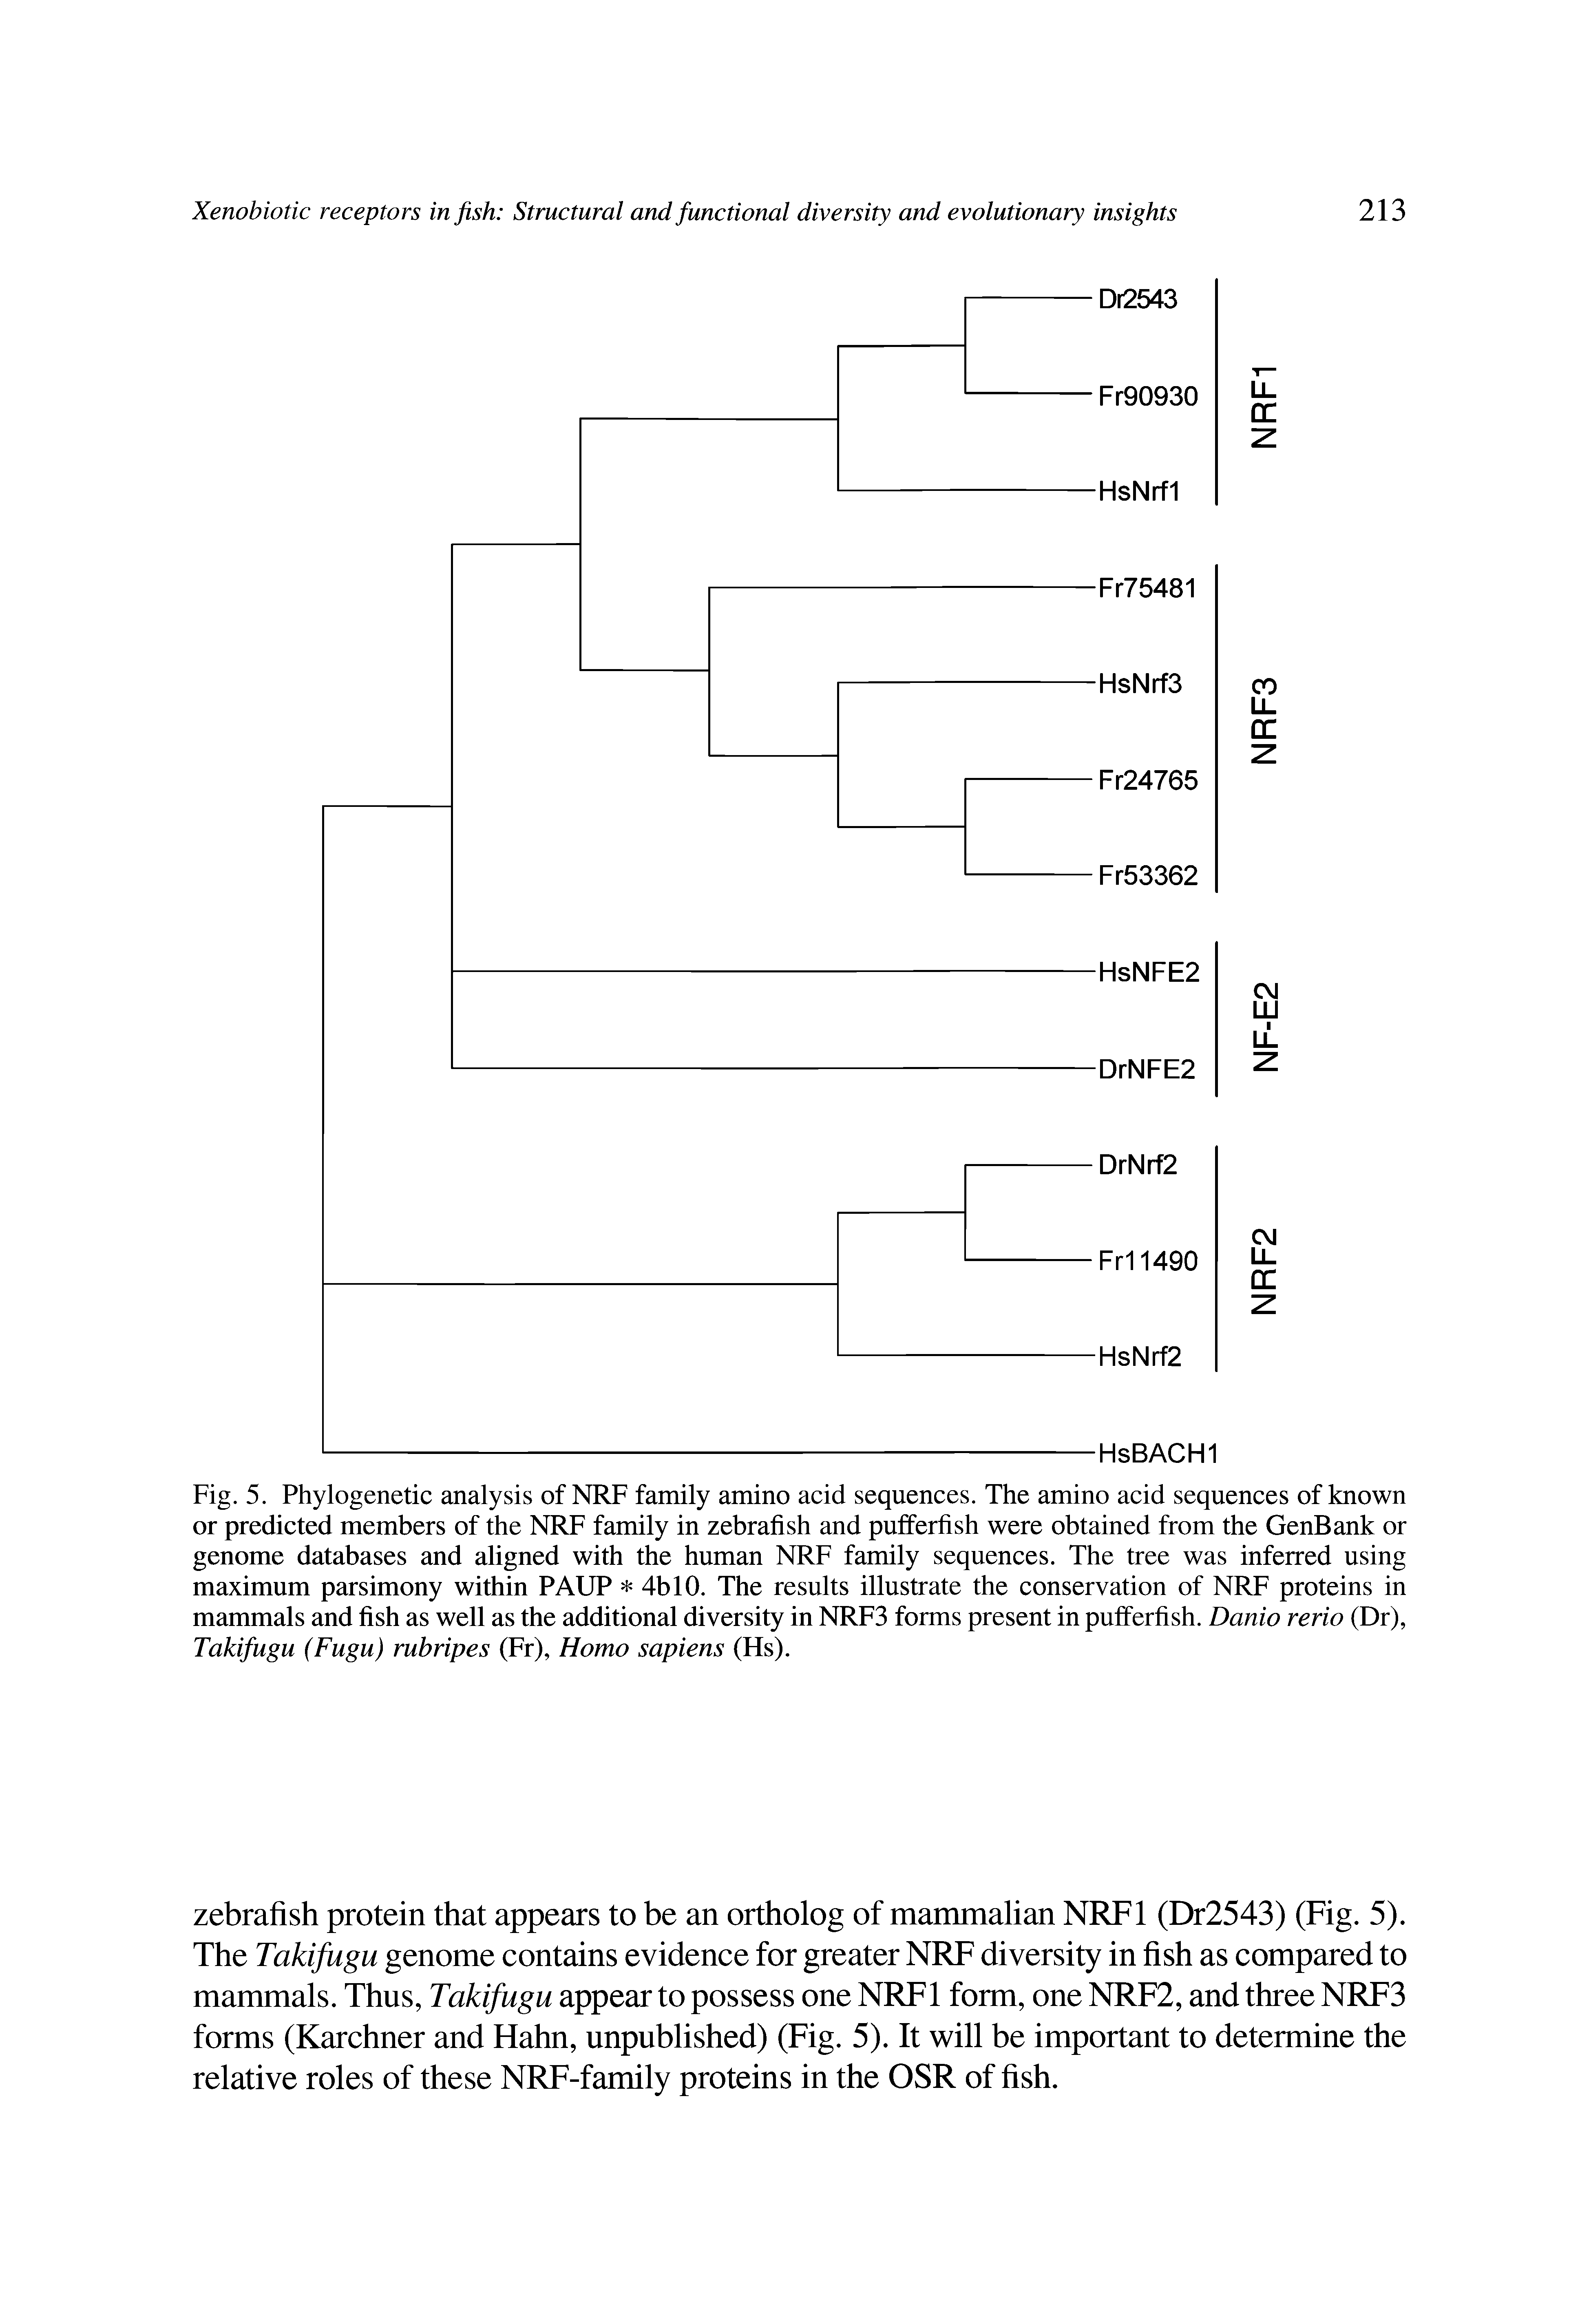 Fig. 5. Phylogenetic analysis of NRF family amino acid sequences. The amino acid sequences of known or predicted members of the NRF family in zebrafish and pufferfish were obtained from the GenBank or genome databases and aligned with the human NRF family sequences. The tree was inferred using maximum parsimony within PAUP 4b 10. The results illustrate the conservation of NRF proteins in mammals and fish as well as the additional diversity in NRF3 forms present in pufferfish. Danio rerio (Dr), Takifugu (Fugu) rubripes (Fr), Homo sapiens (Hs).